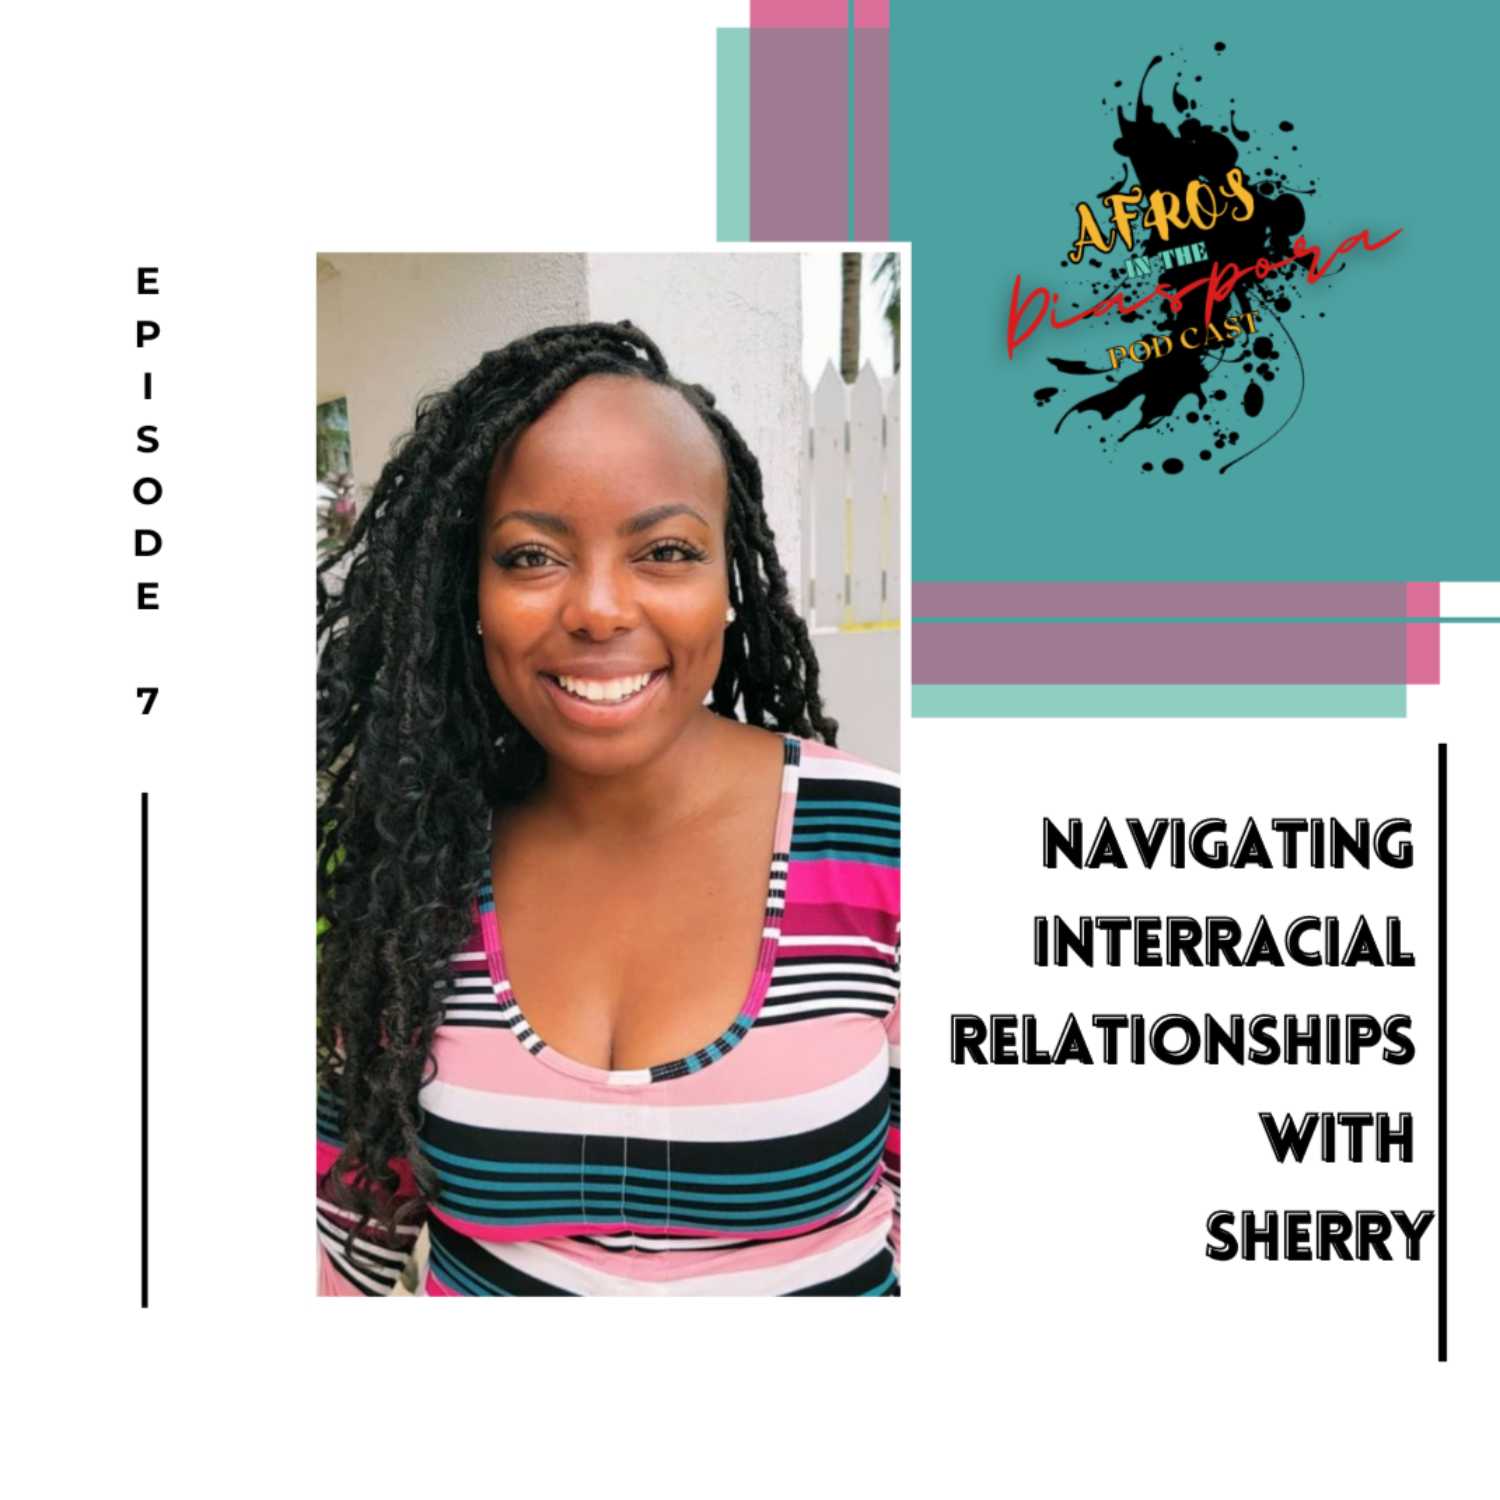 Navigating Interracial Relationships with Sherry